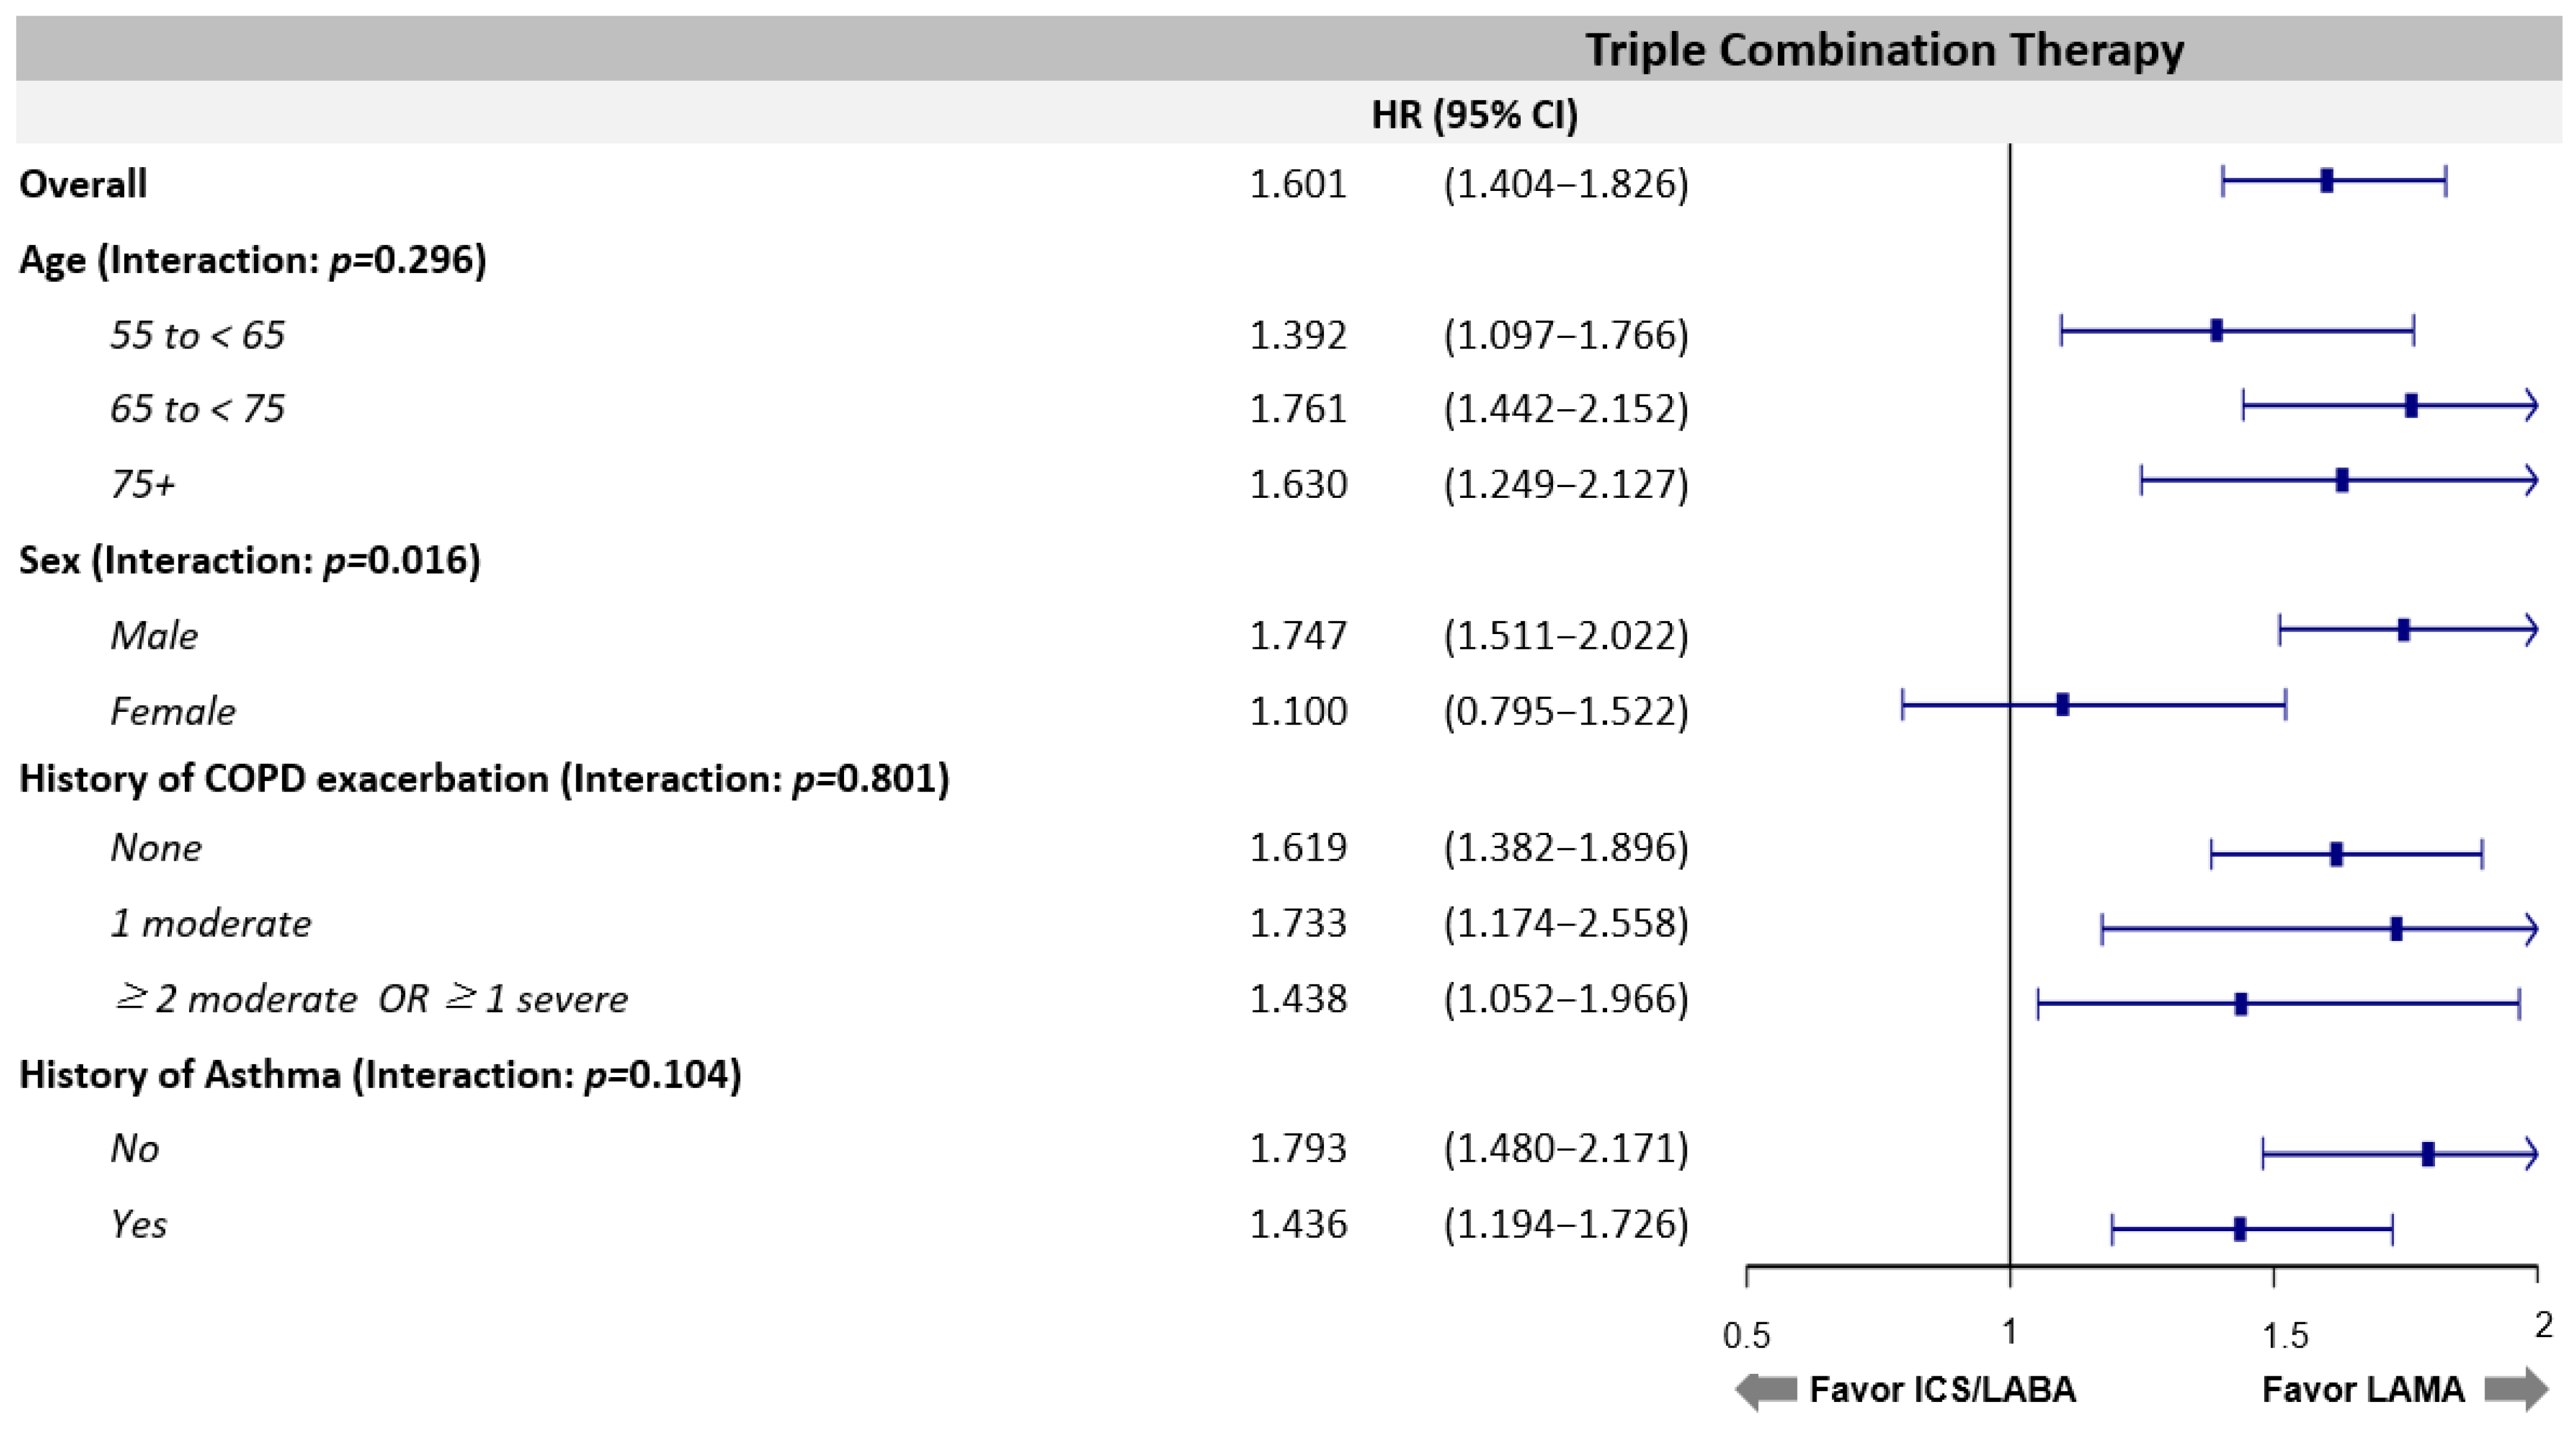 JPM | Free Full-Text | Escalation Time to Open Triple Combination Therapy  from the Initiation of LAMA versus ICS/LABA in COPD Management: Findings  from Comparing the Incidence of Tiotropium and ICS/LABA in